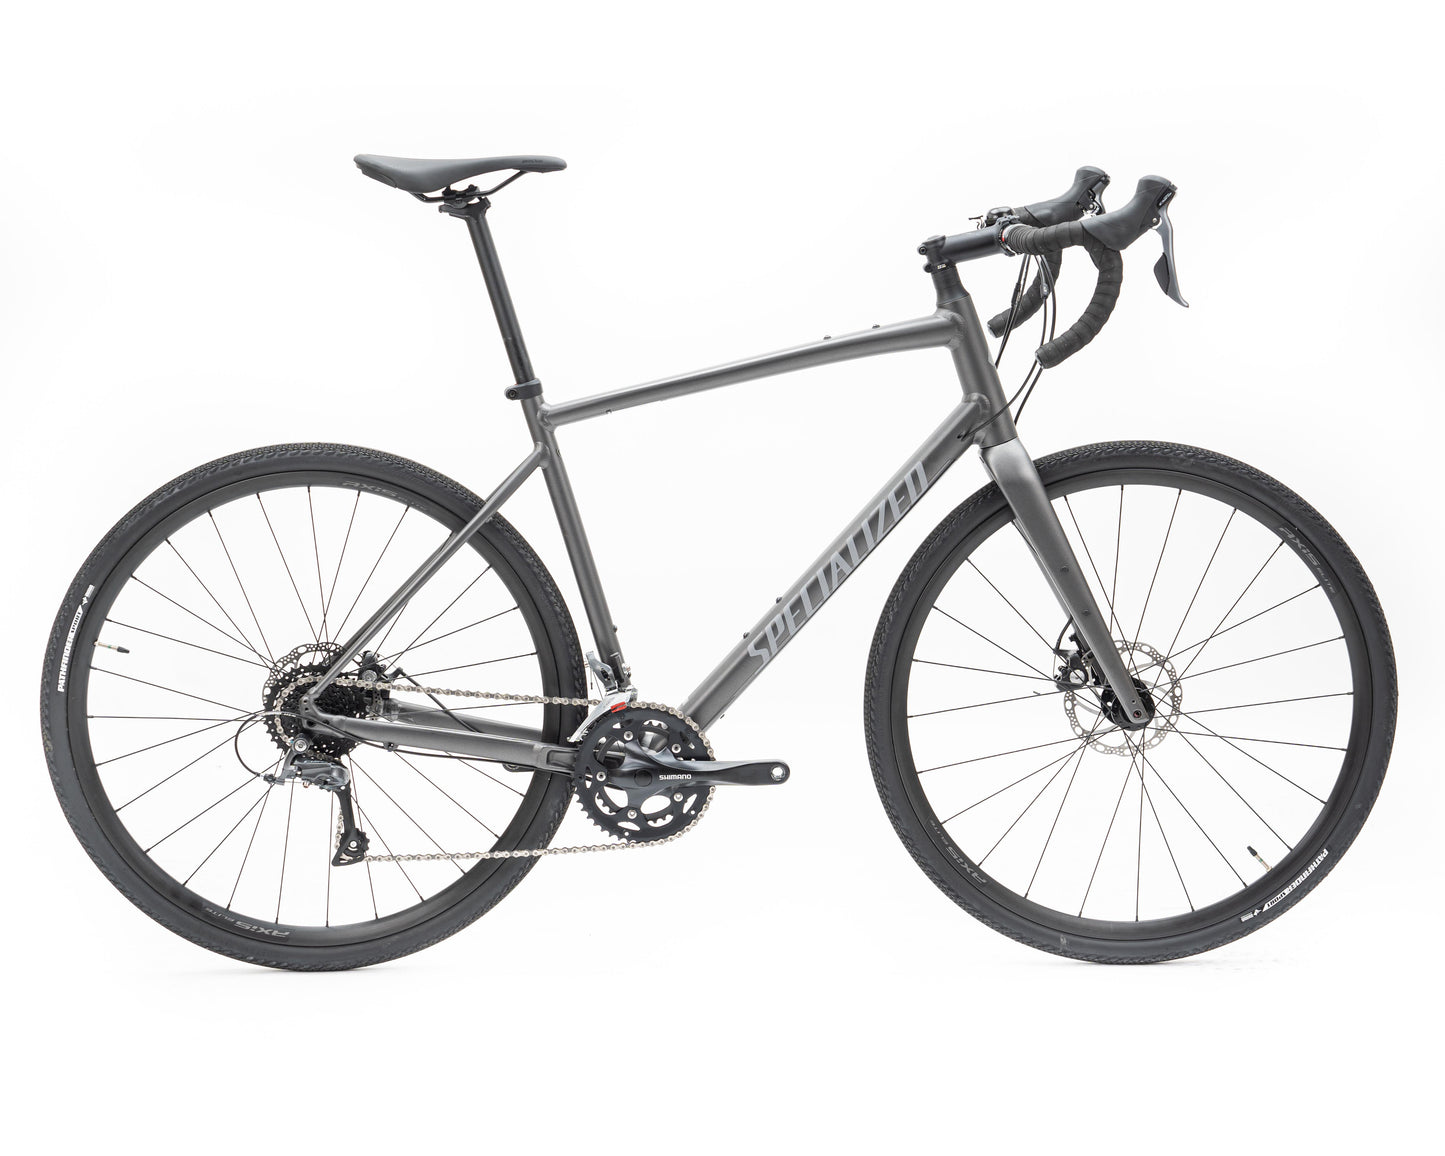 2022 Specialized Diverge E5 Smk/Clgry/Chrm 58 (New Other)